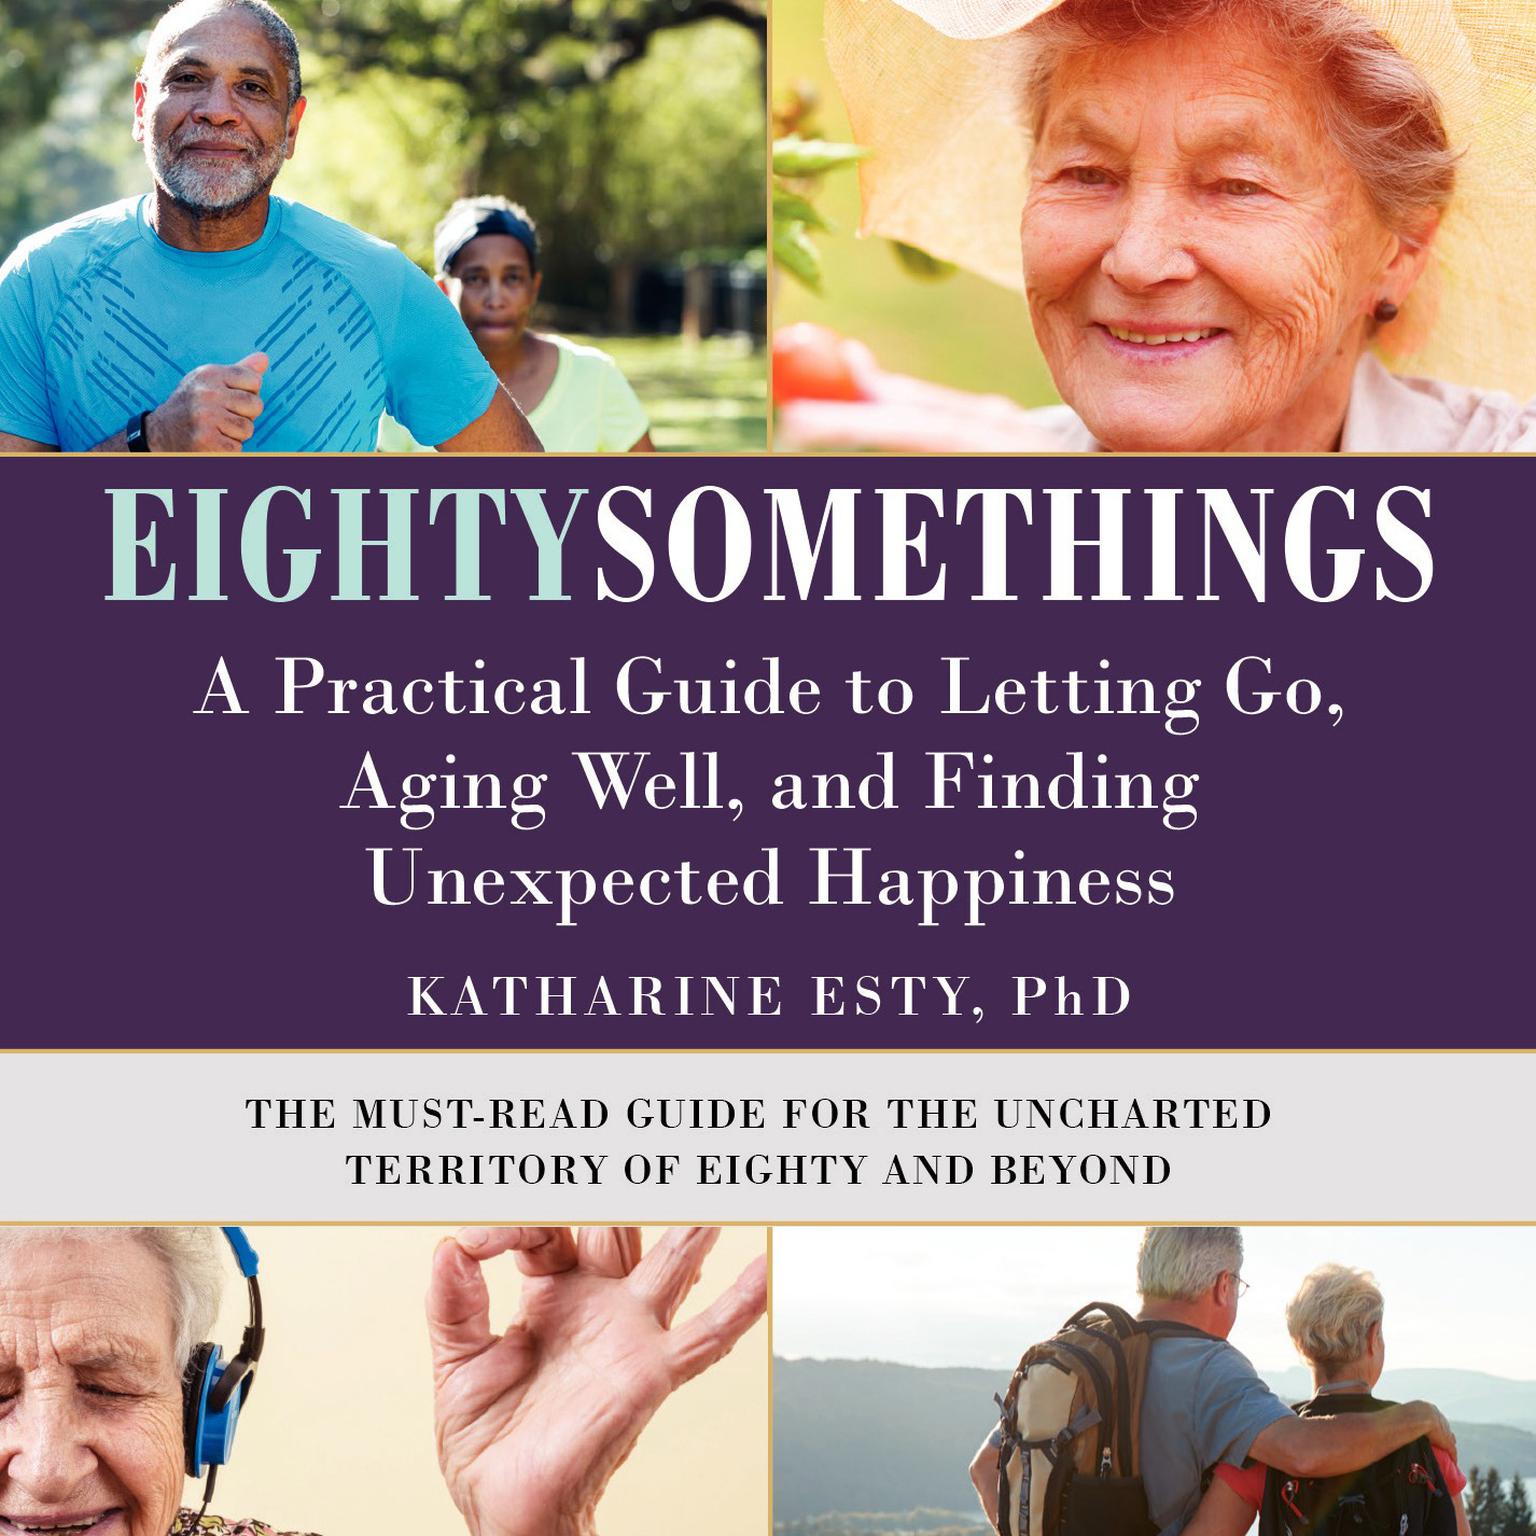 Eightysomethings: A Practical Guide to Letting Go, Aging Well, and Finding Unexpected Happiness Audiobook, by Katharine Esty